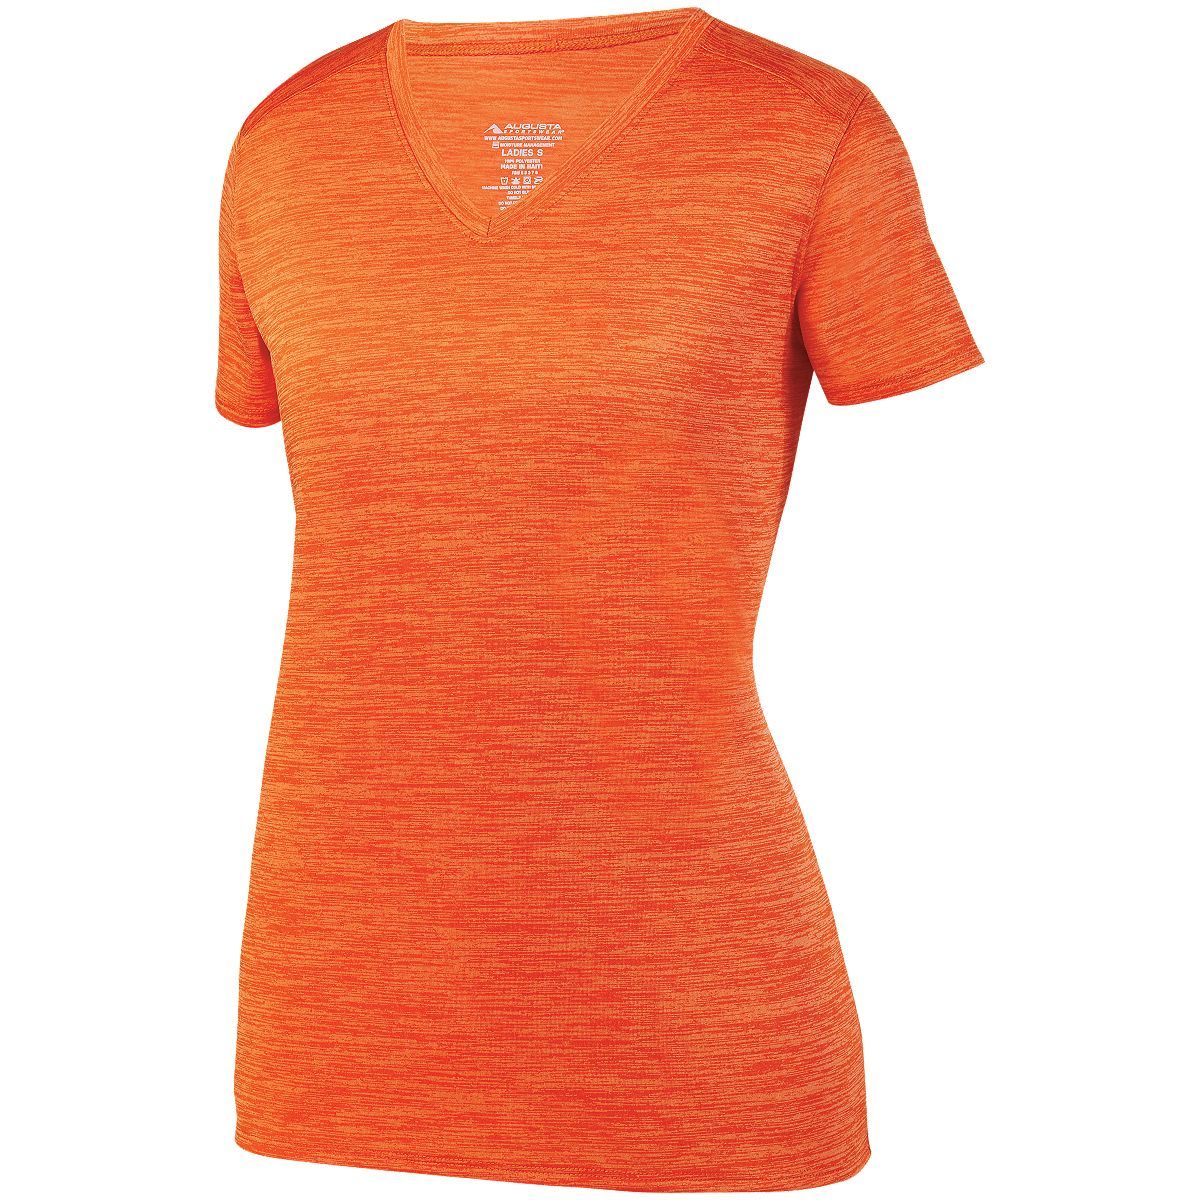 Augusta Sportswear Ladies Shadow Tonal Heather Training Tee in Orange  -Part of the Ladies, Ladies-Tee-Shirt, T-Shirts, Augusta-Products, Shirts, Tonal-Fleece-Collection product lines at KanaleyCreations.com